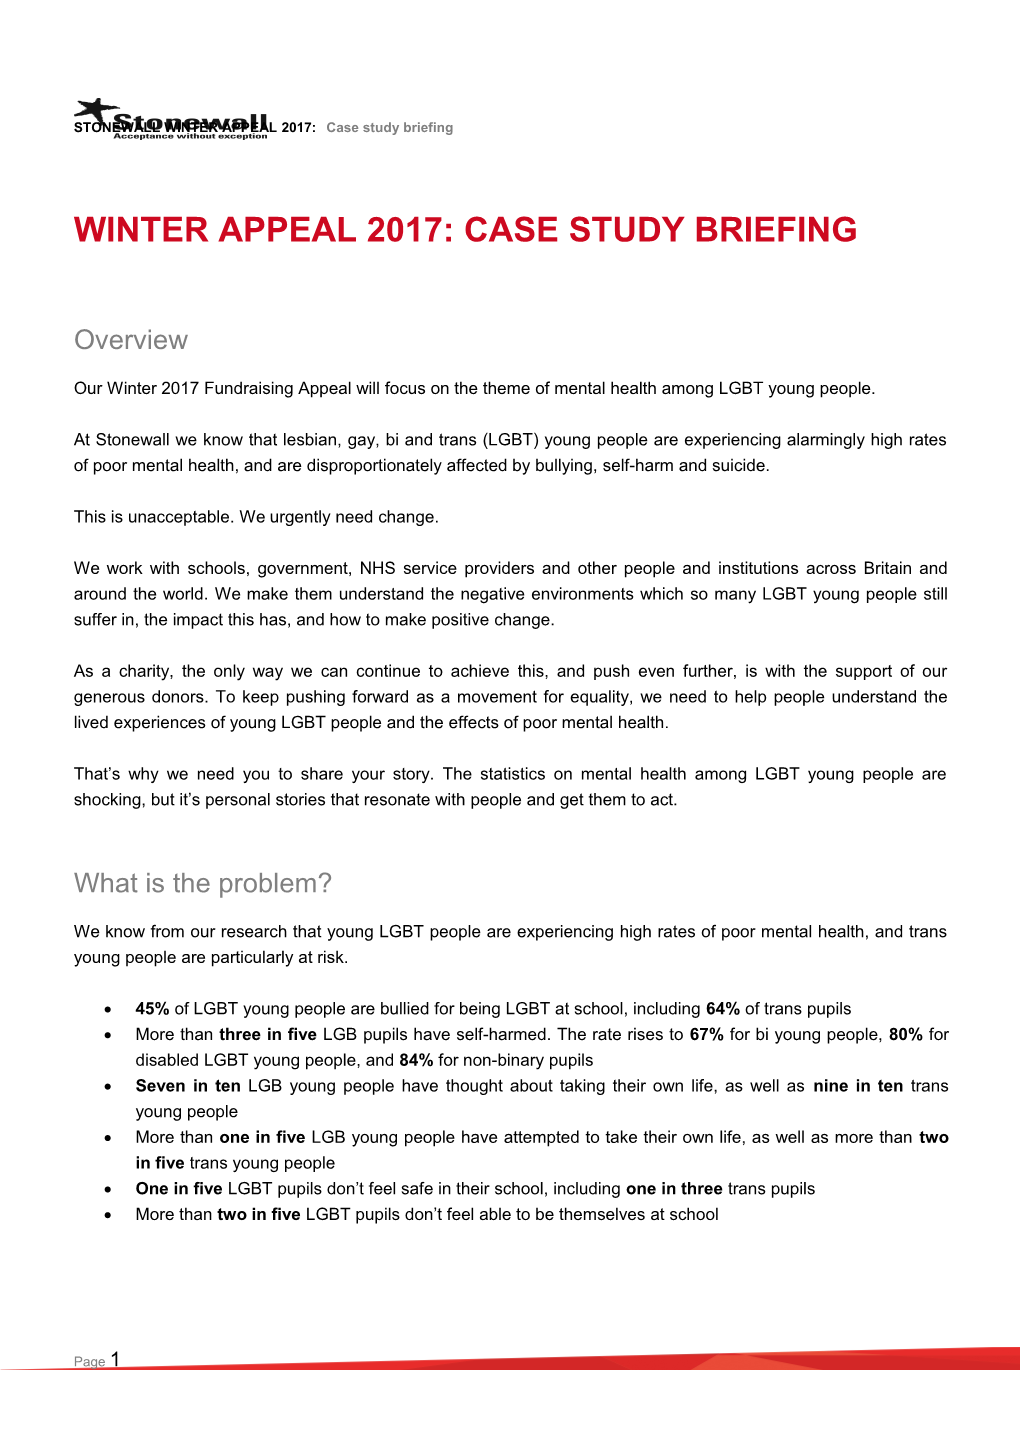 Winter Appeal 2017: Case Study Briefing